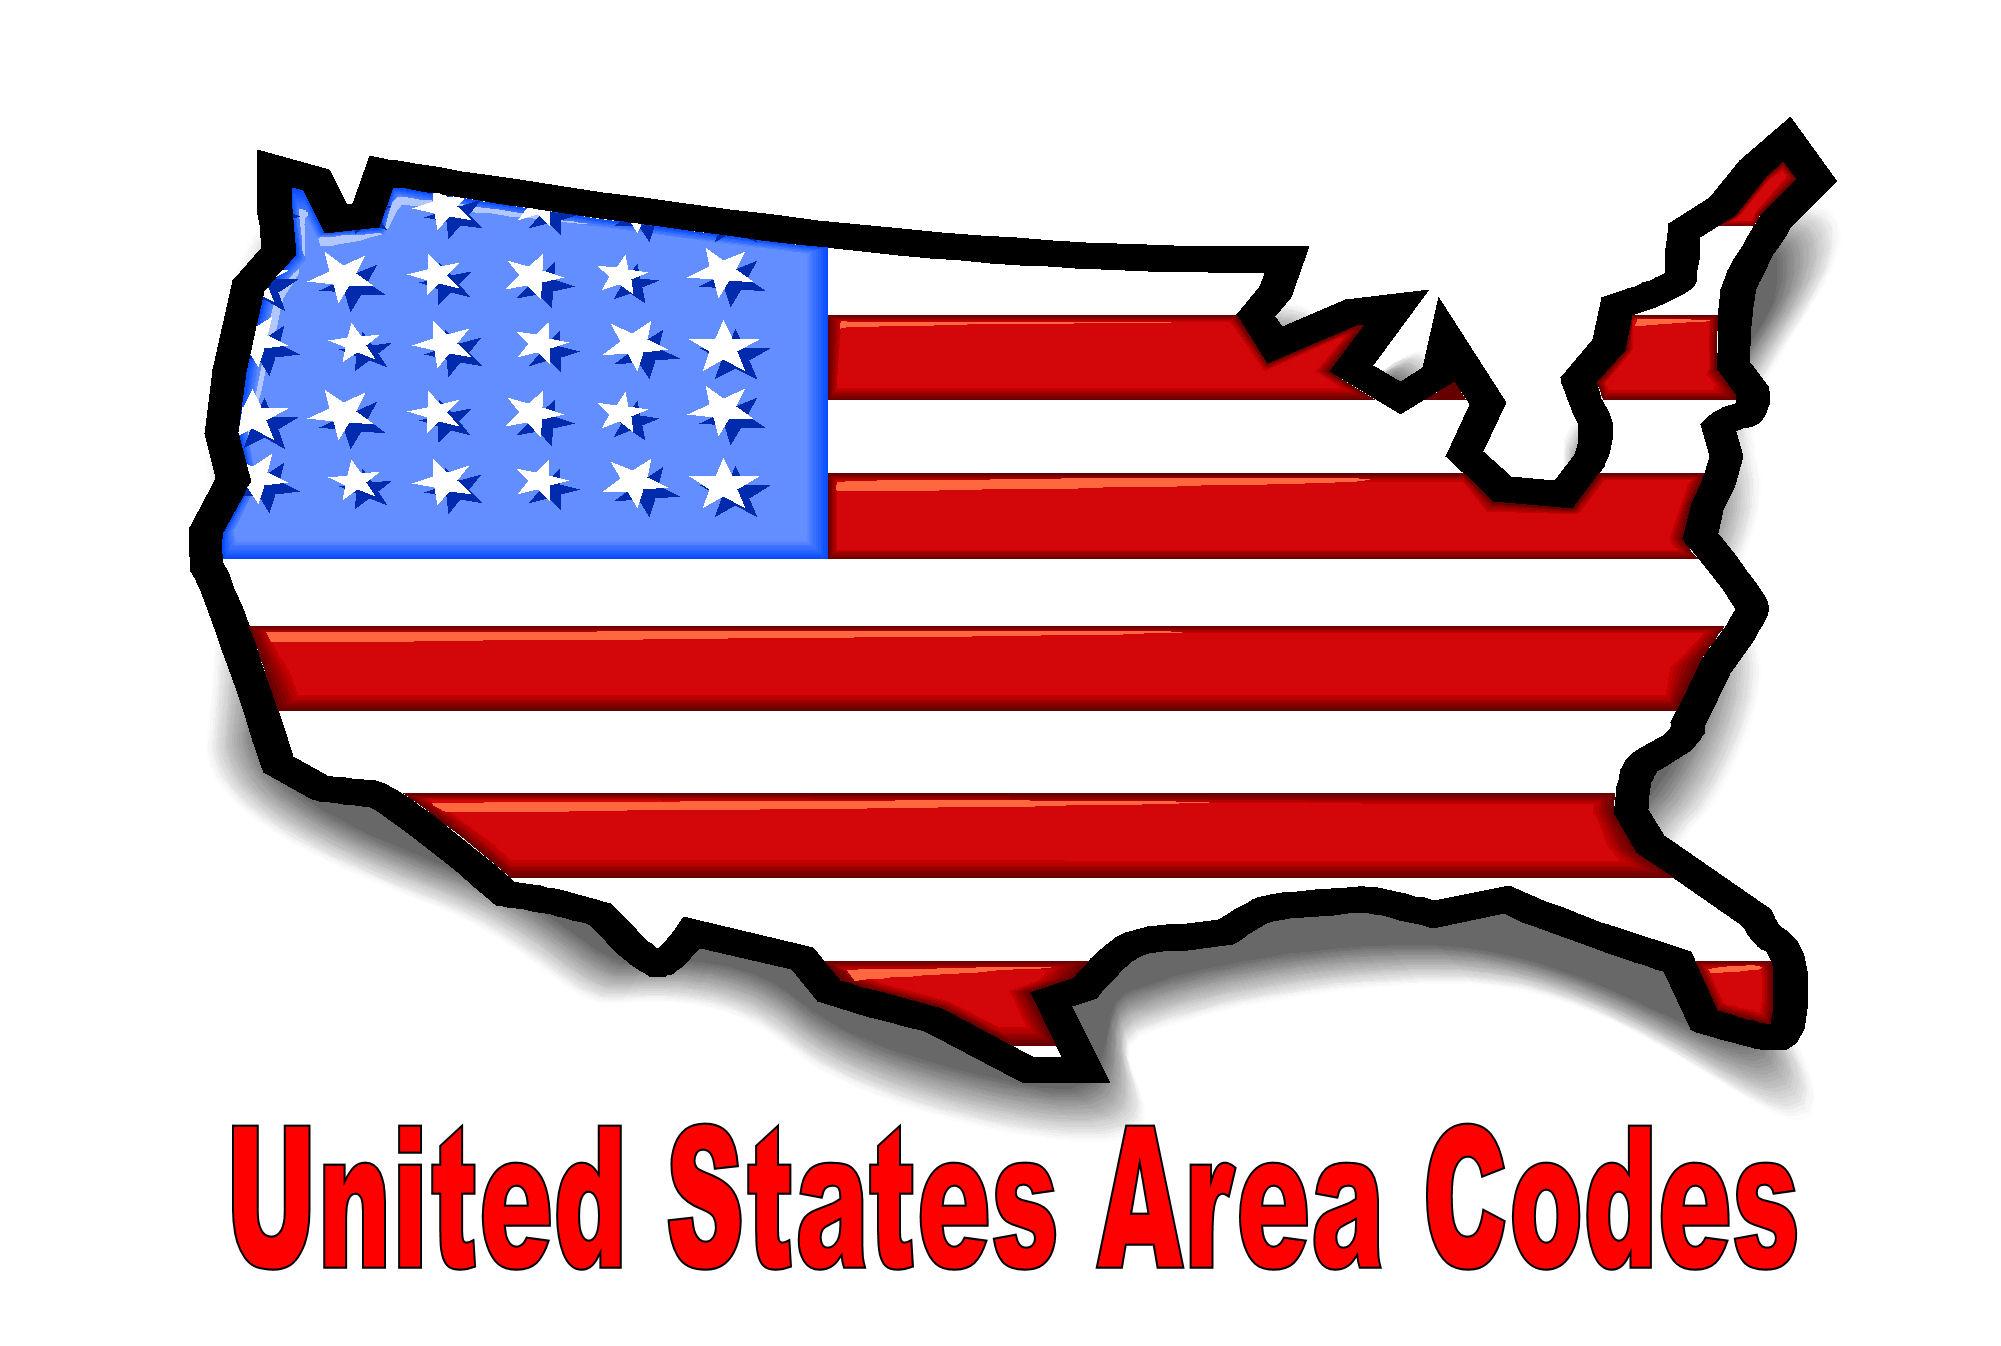 Printable area code list by State and Number from PrintableAreaCodeList.com